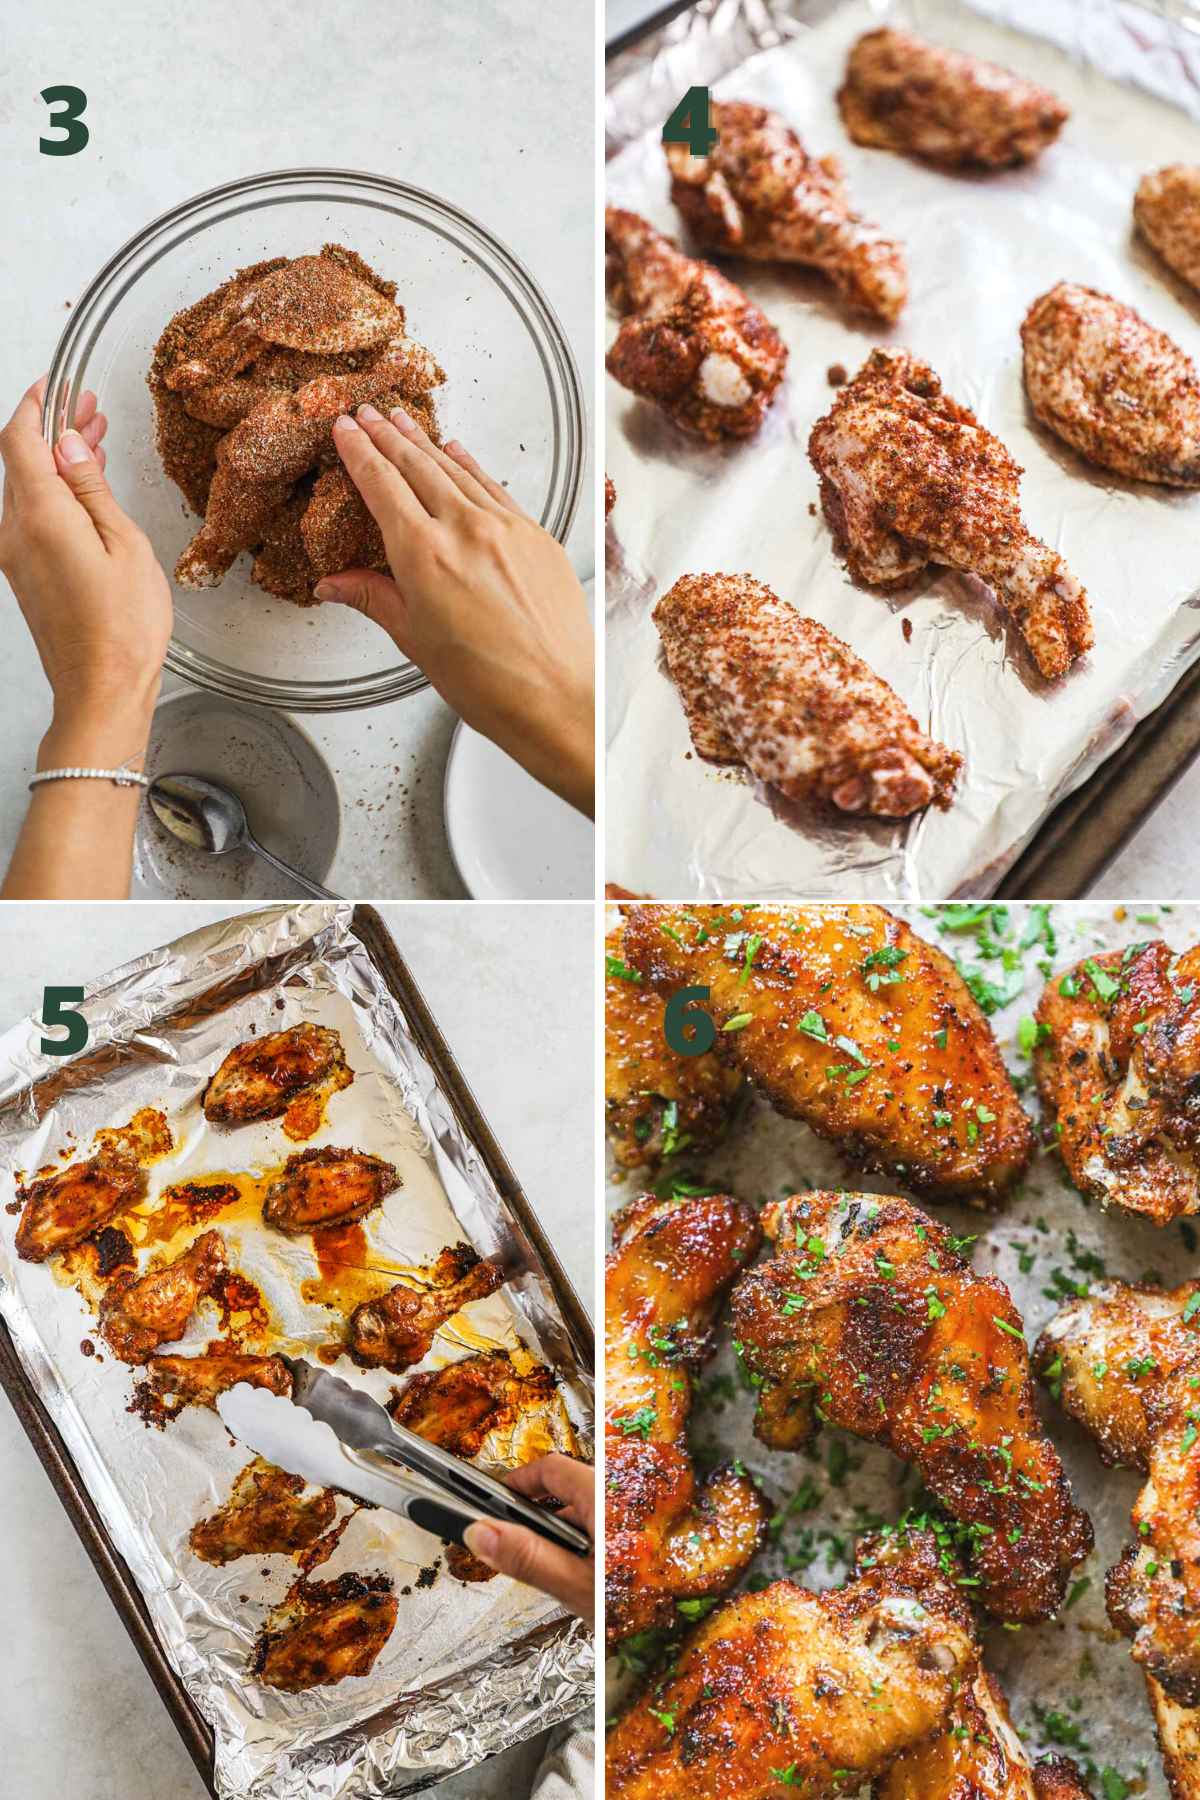 Steps to make baked dry rub chicken wings, rub wings with brown sugar dry rub, bake at 400°F, and serve with finely chopped Italian parsley.